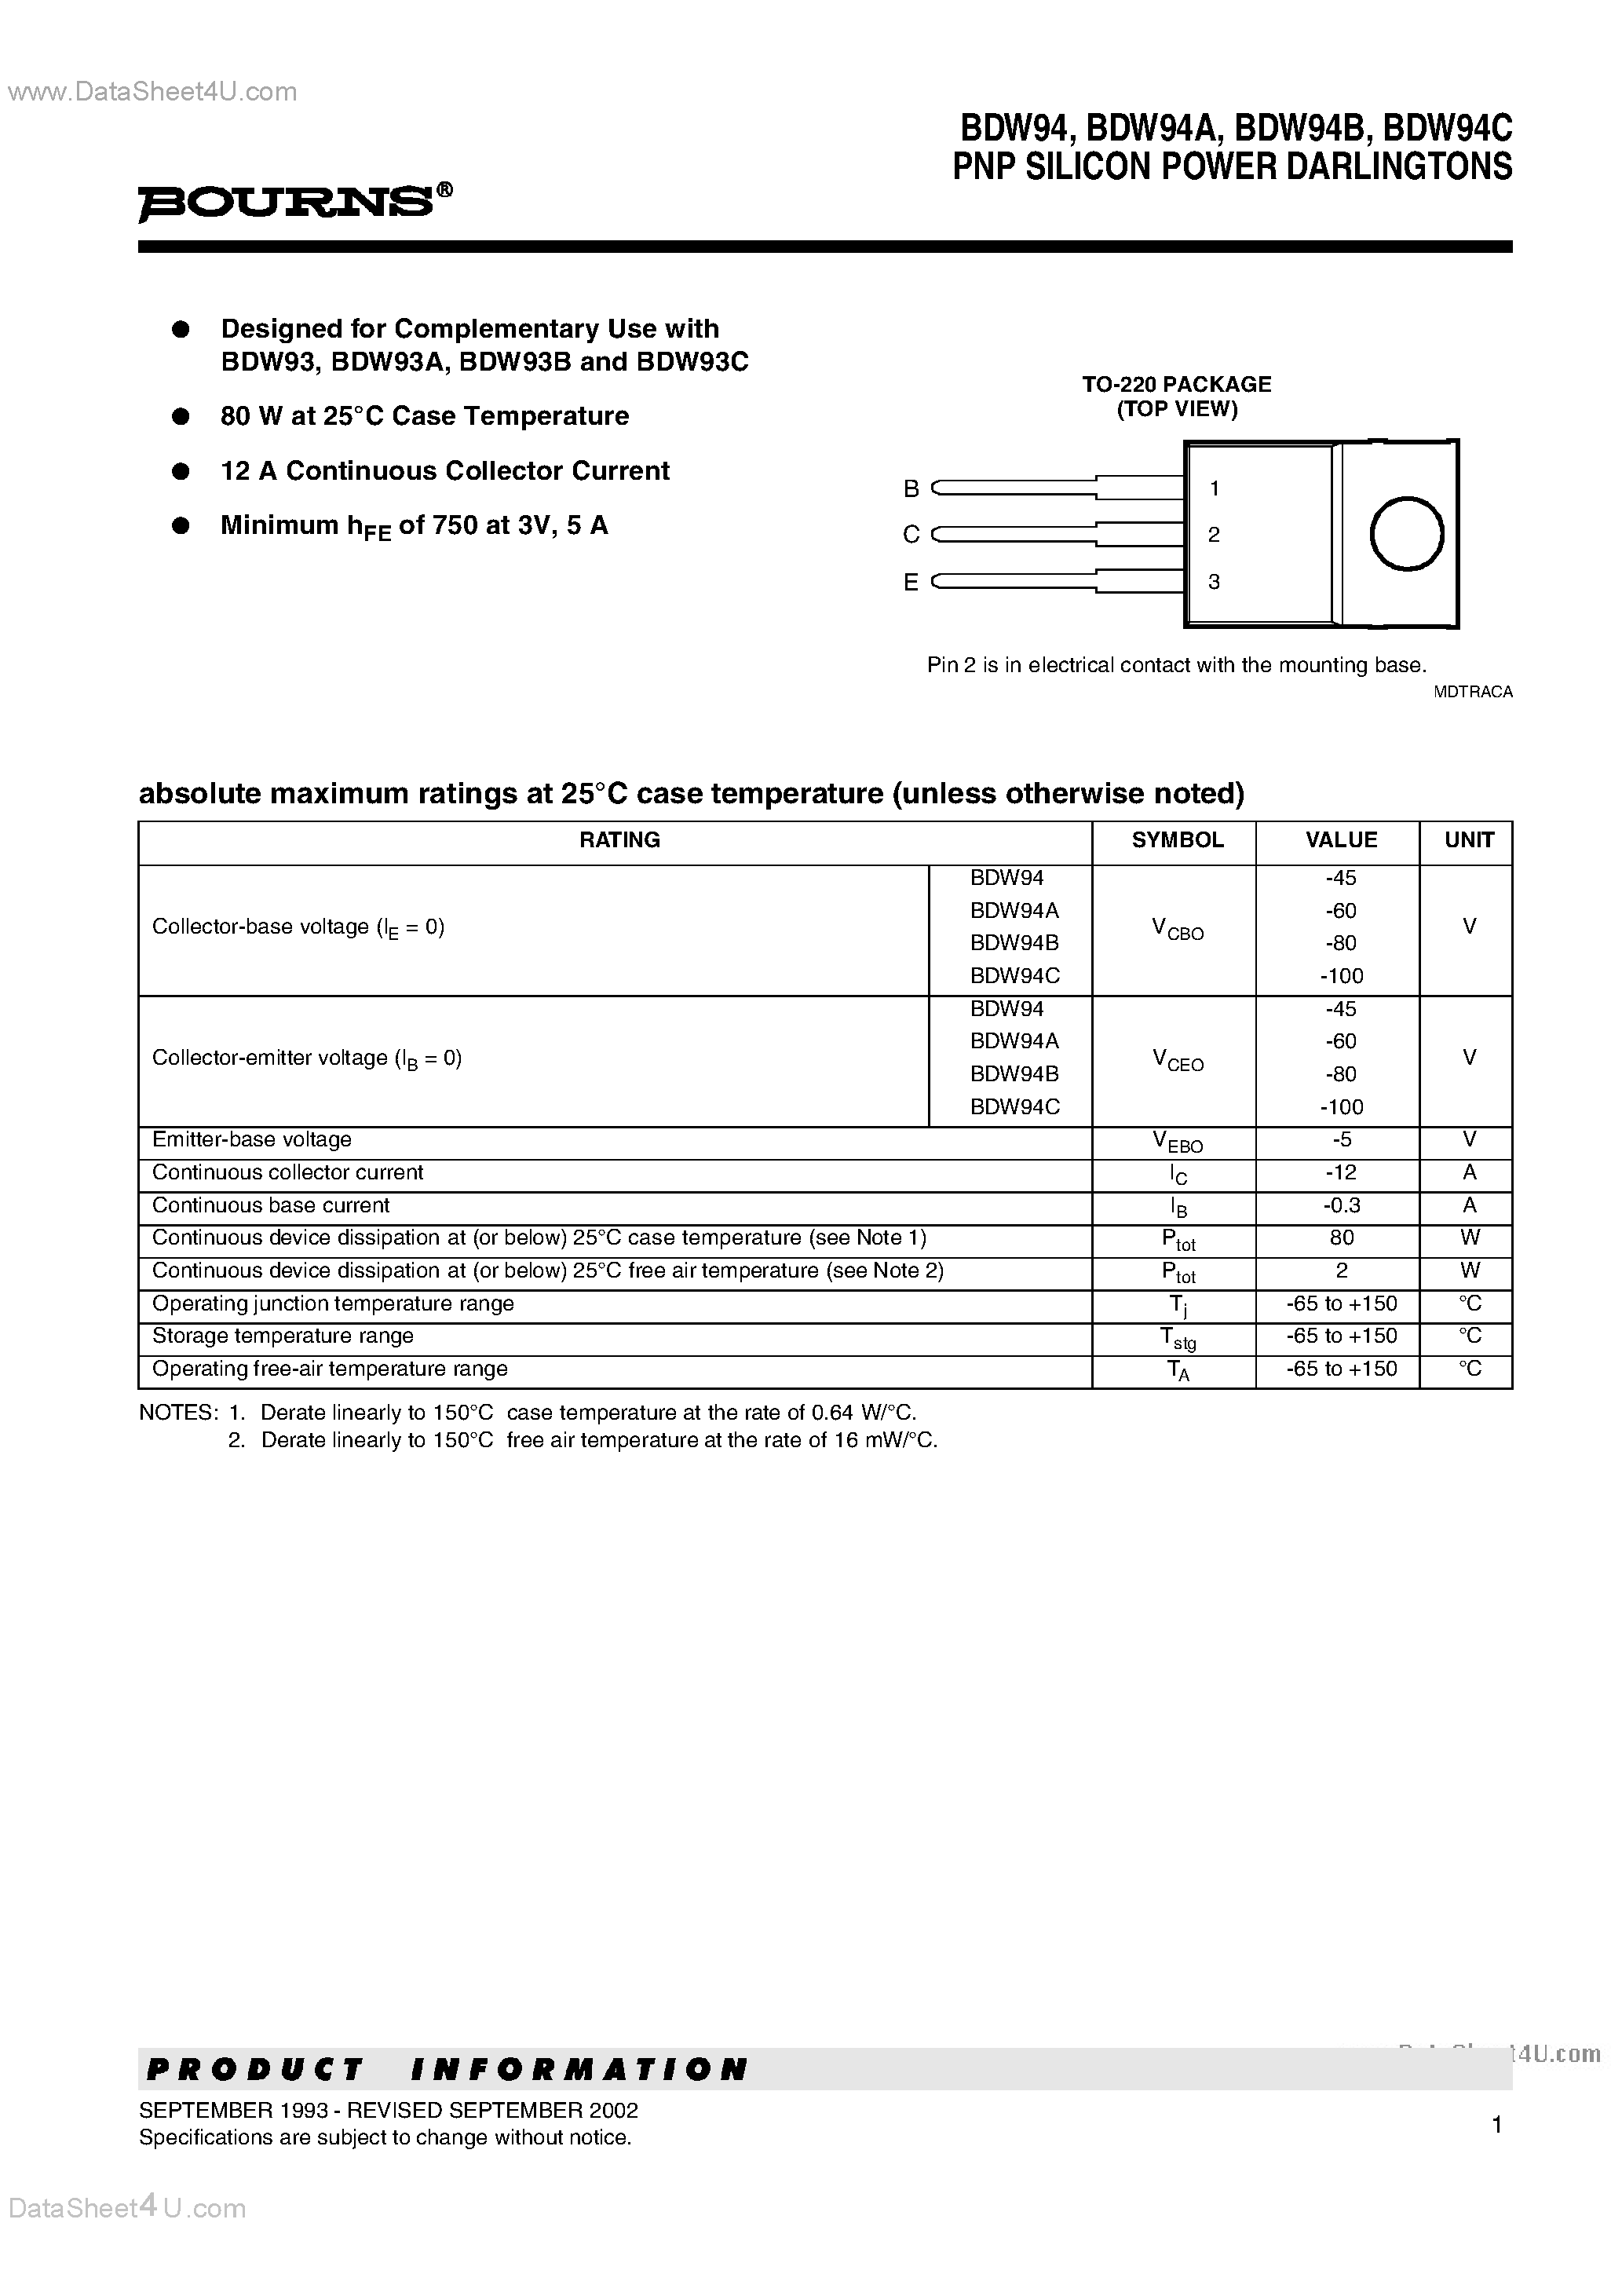 Datasheet BDW94 - PNP SILICON POWER DARLINGTONS page 1